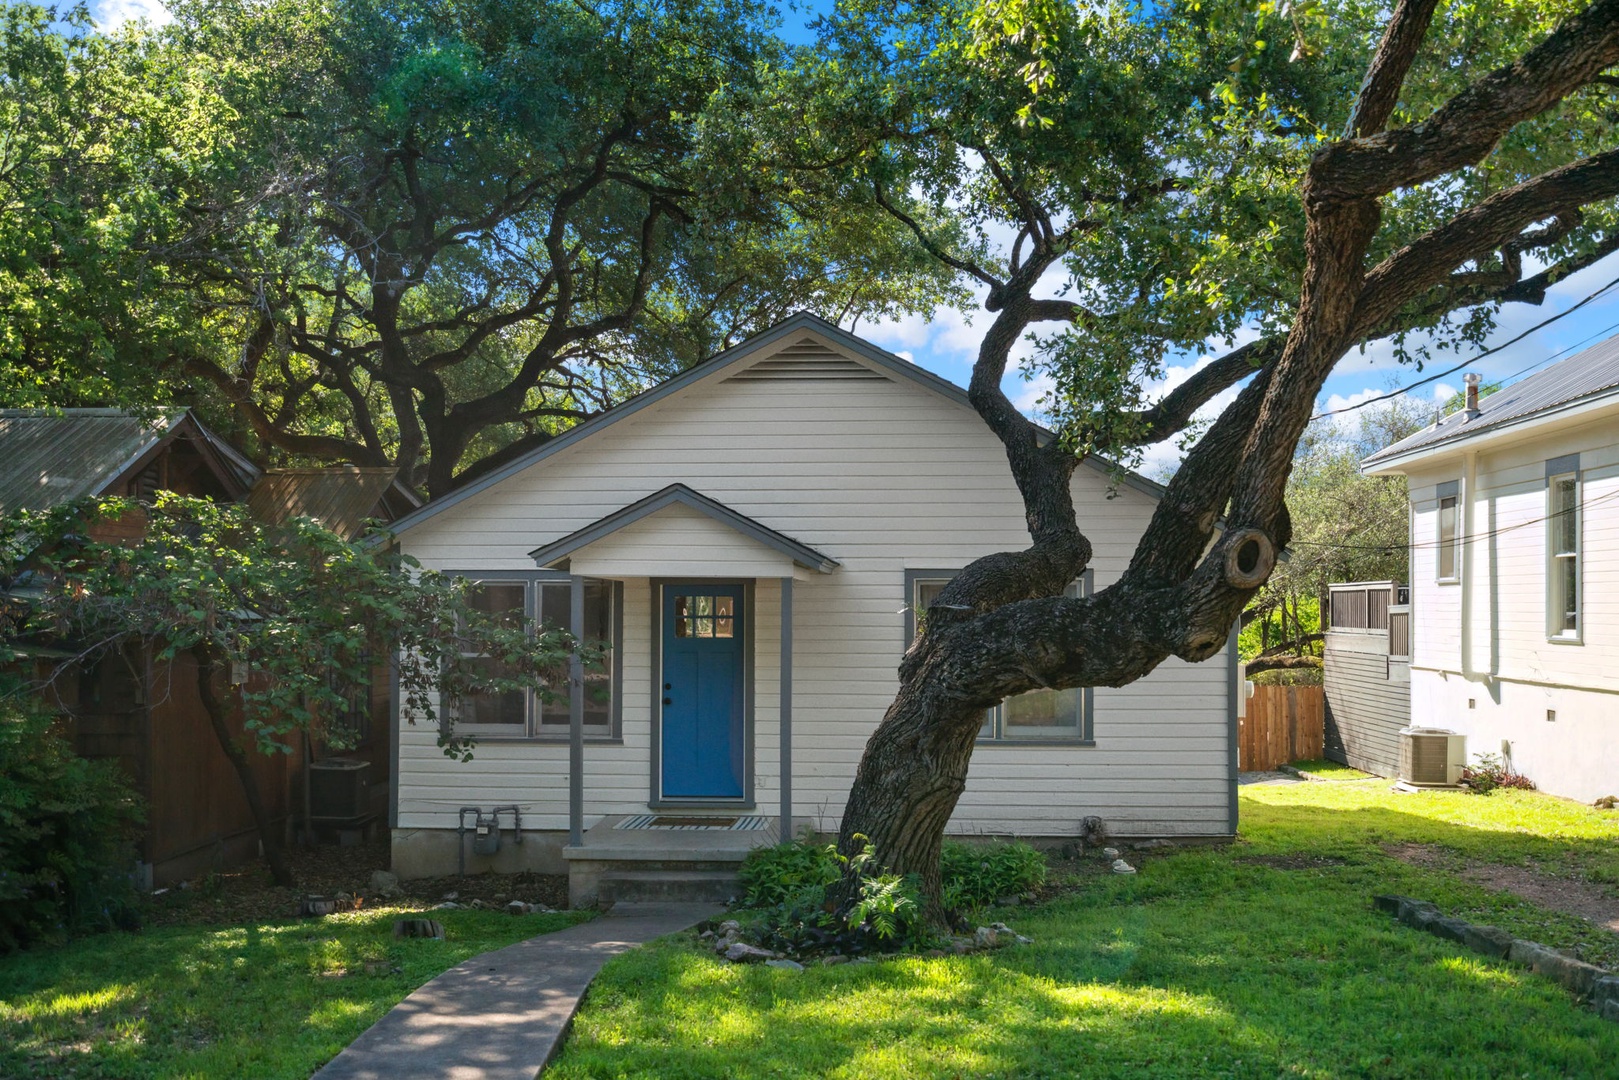 Step into the 3rd of 3 exceptional homes, Deep in the Heart of SoCo – Guest House!